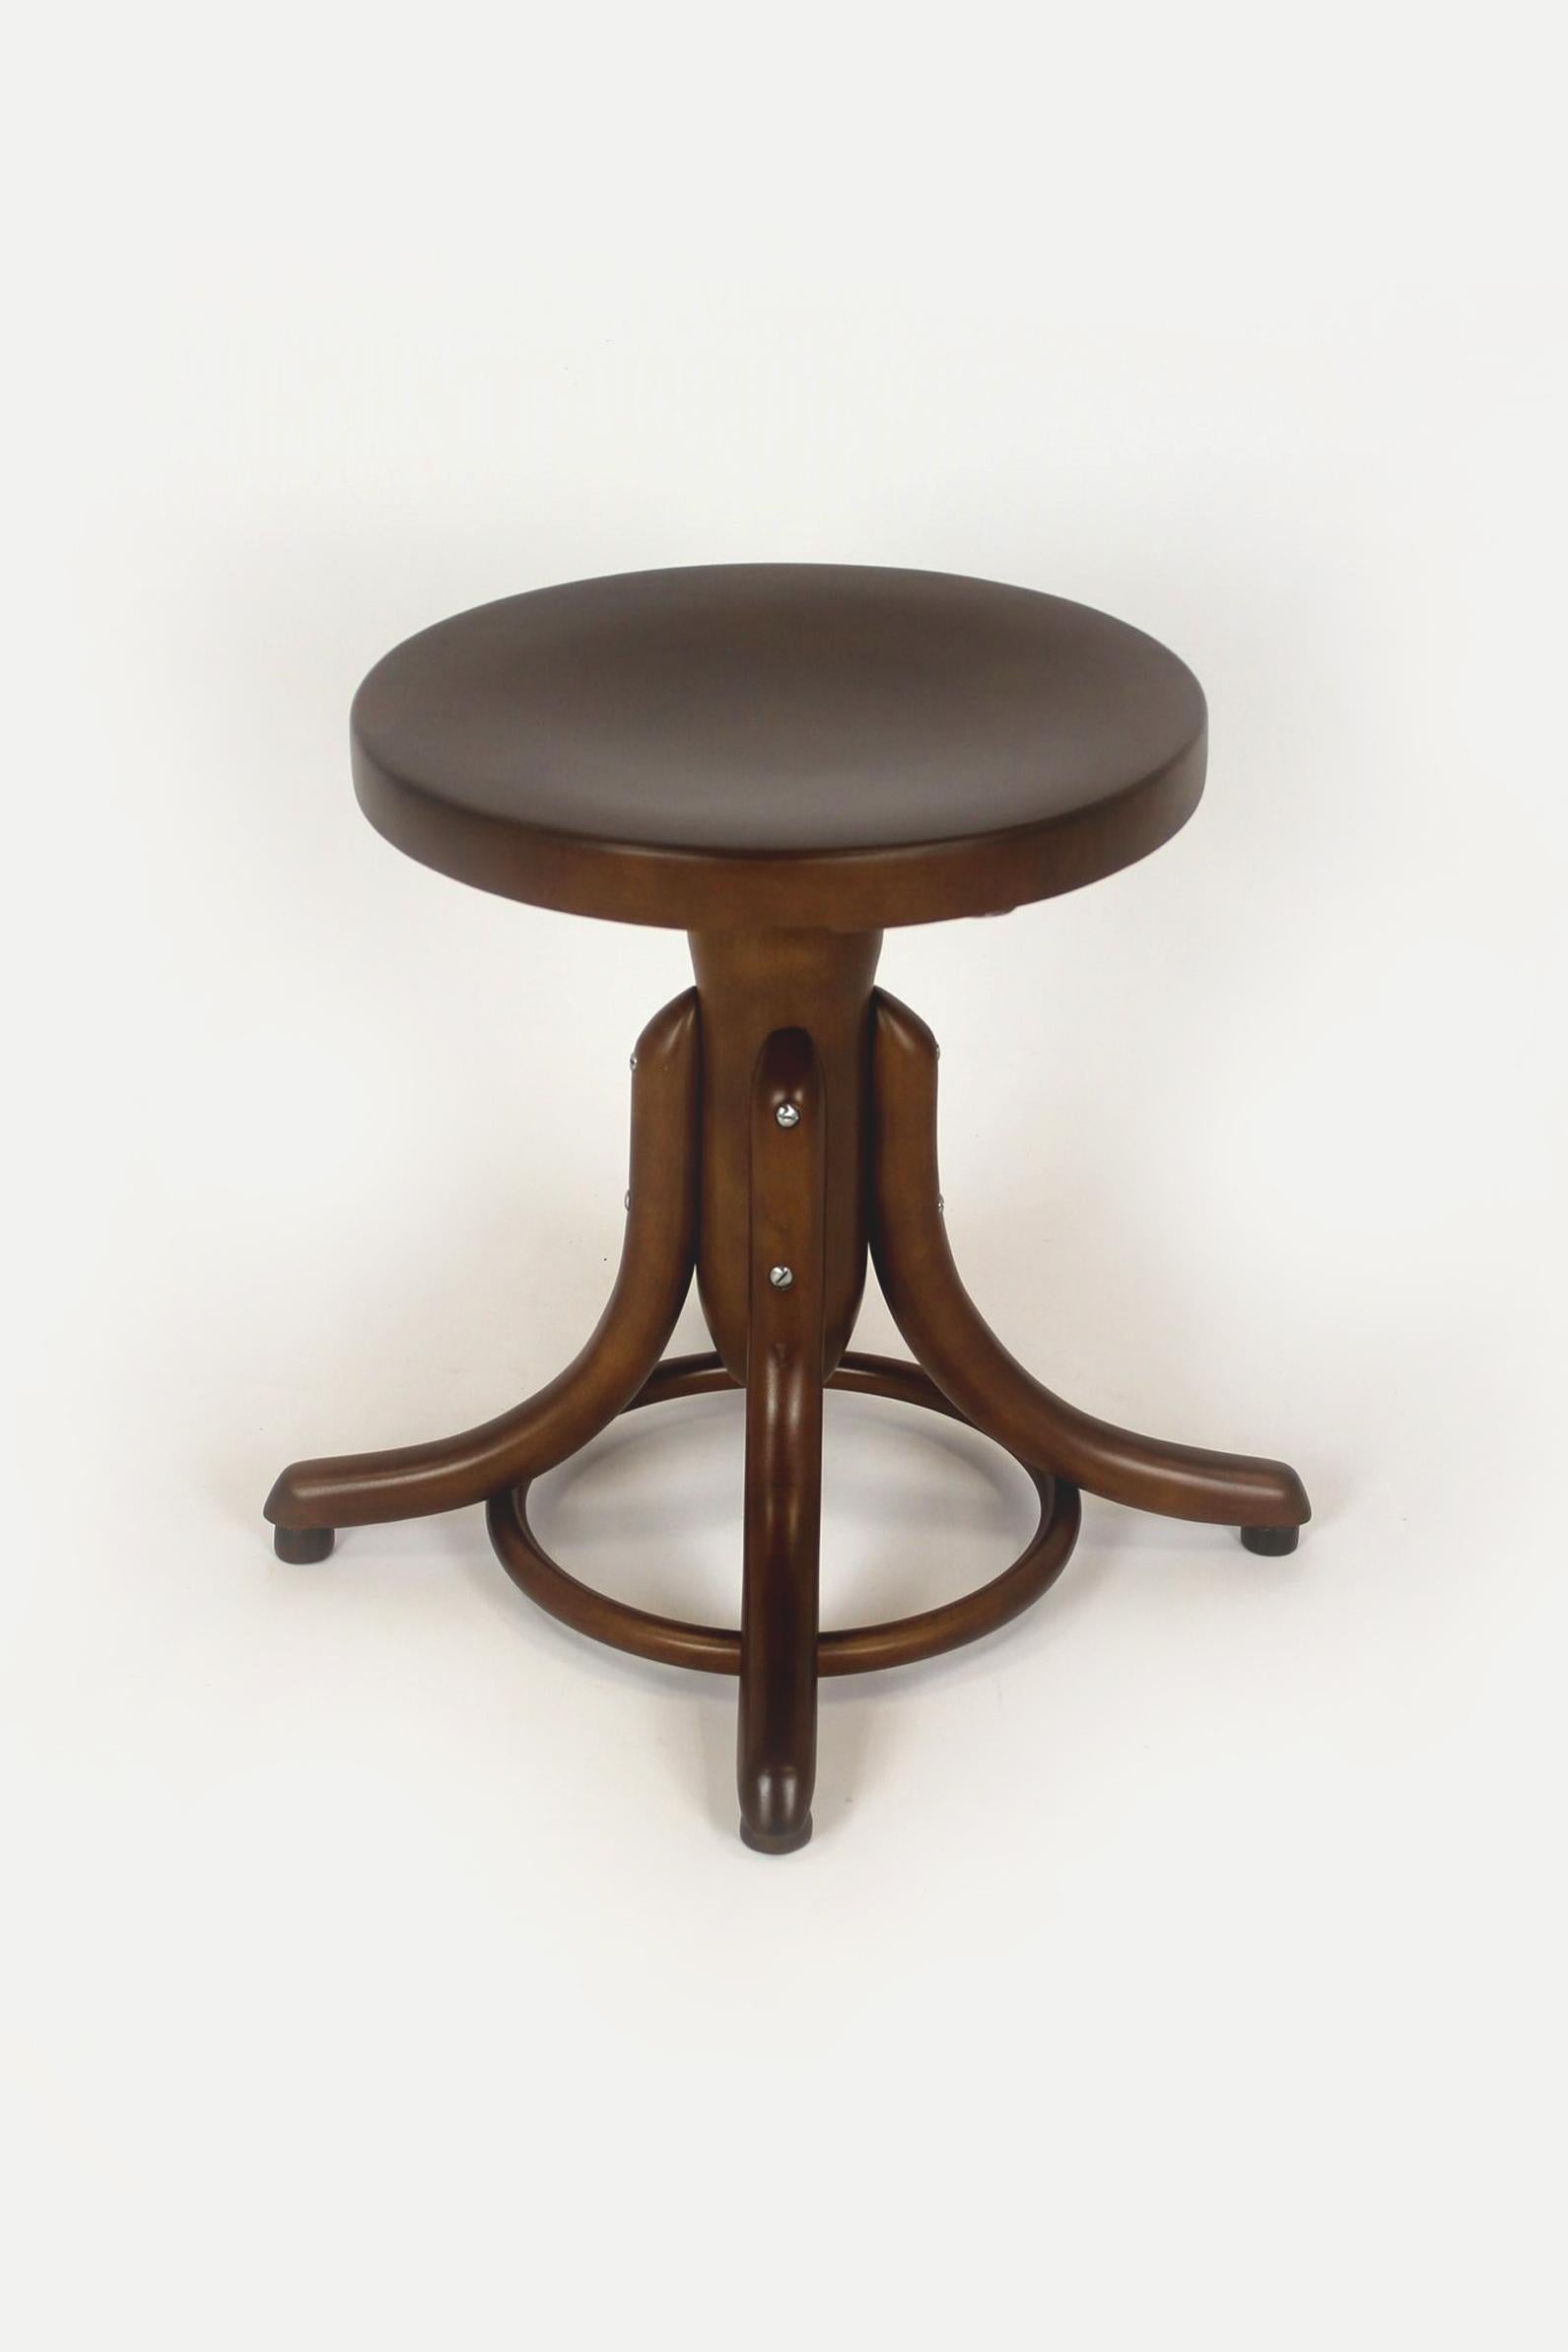 Restored Thonet Style Bentwood Piano Stool, 1940s For Sale 1